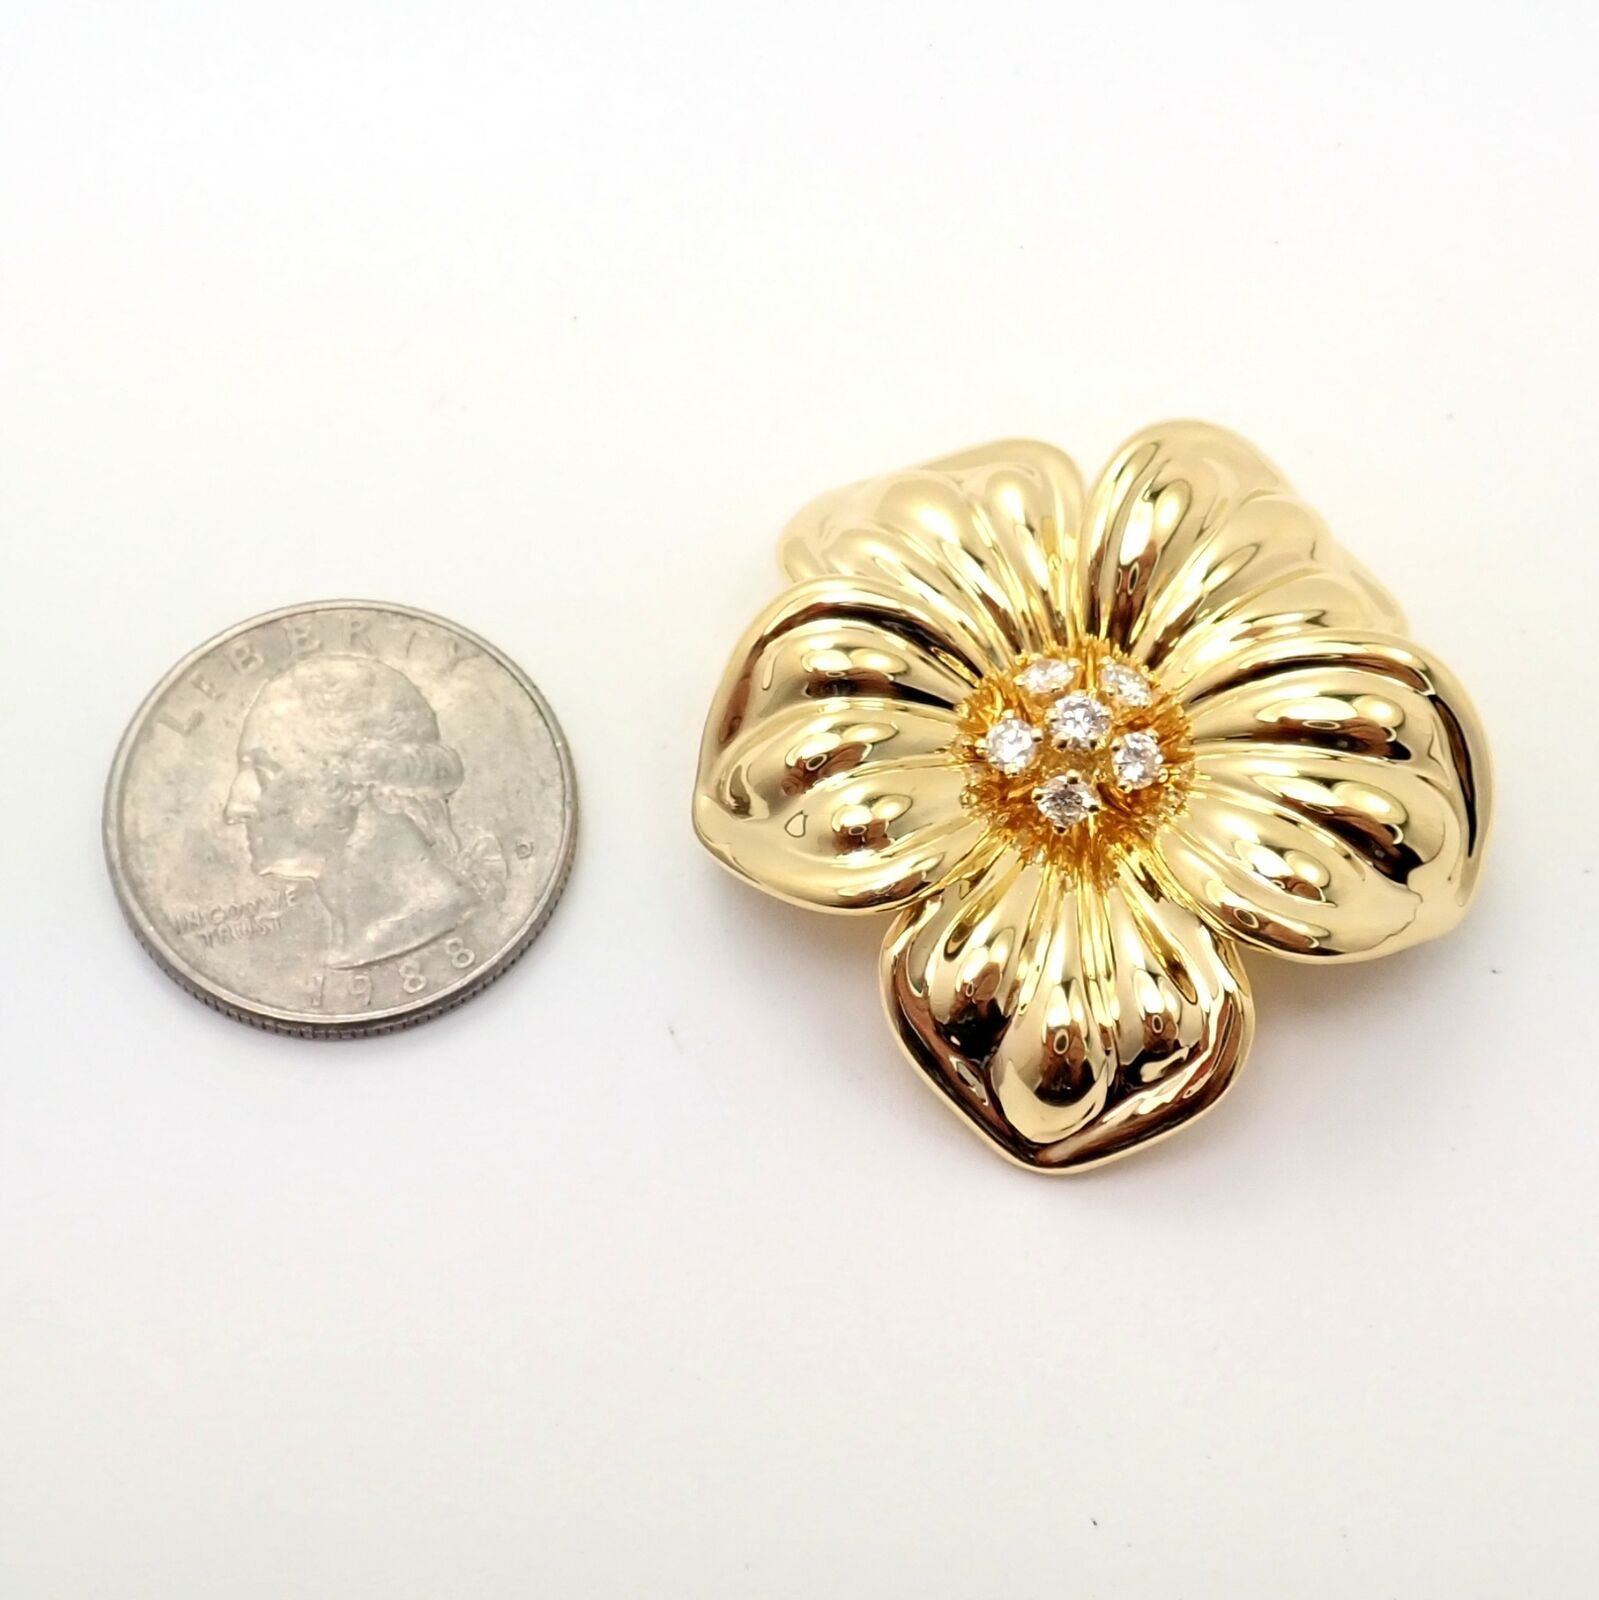 Van Cleef & Arpels Diamond 18k Yellow Gold Magnolia Flower Pin Brooch Size ONE SIZE - 5 Thumbnail